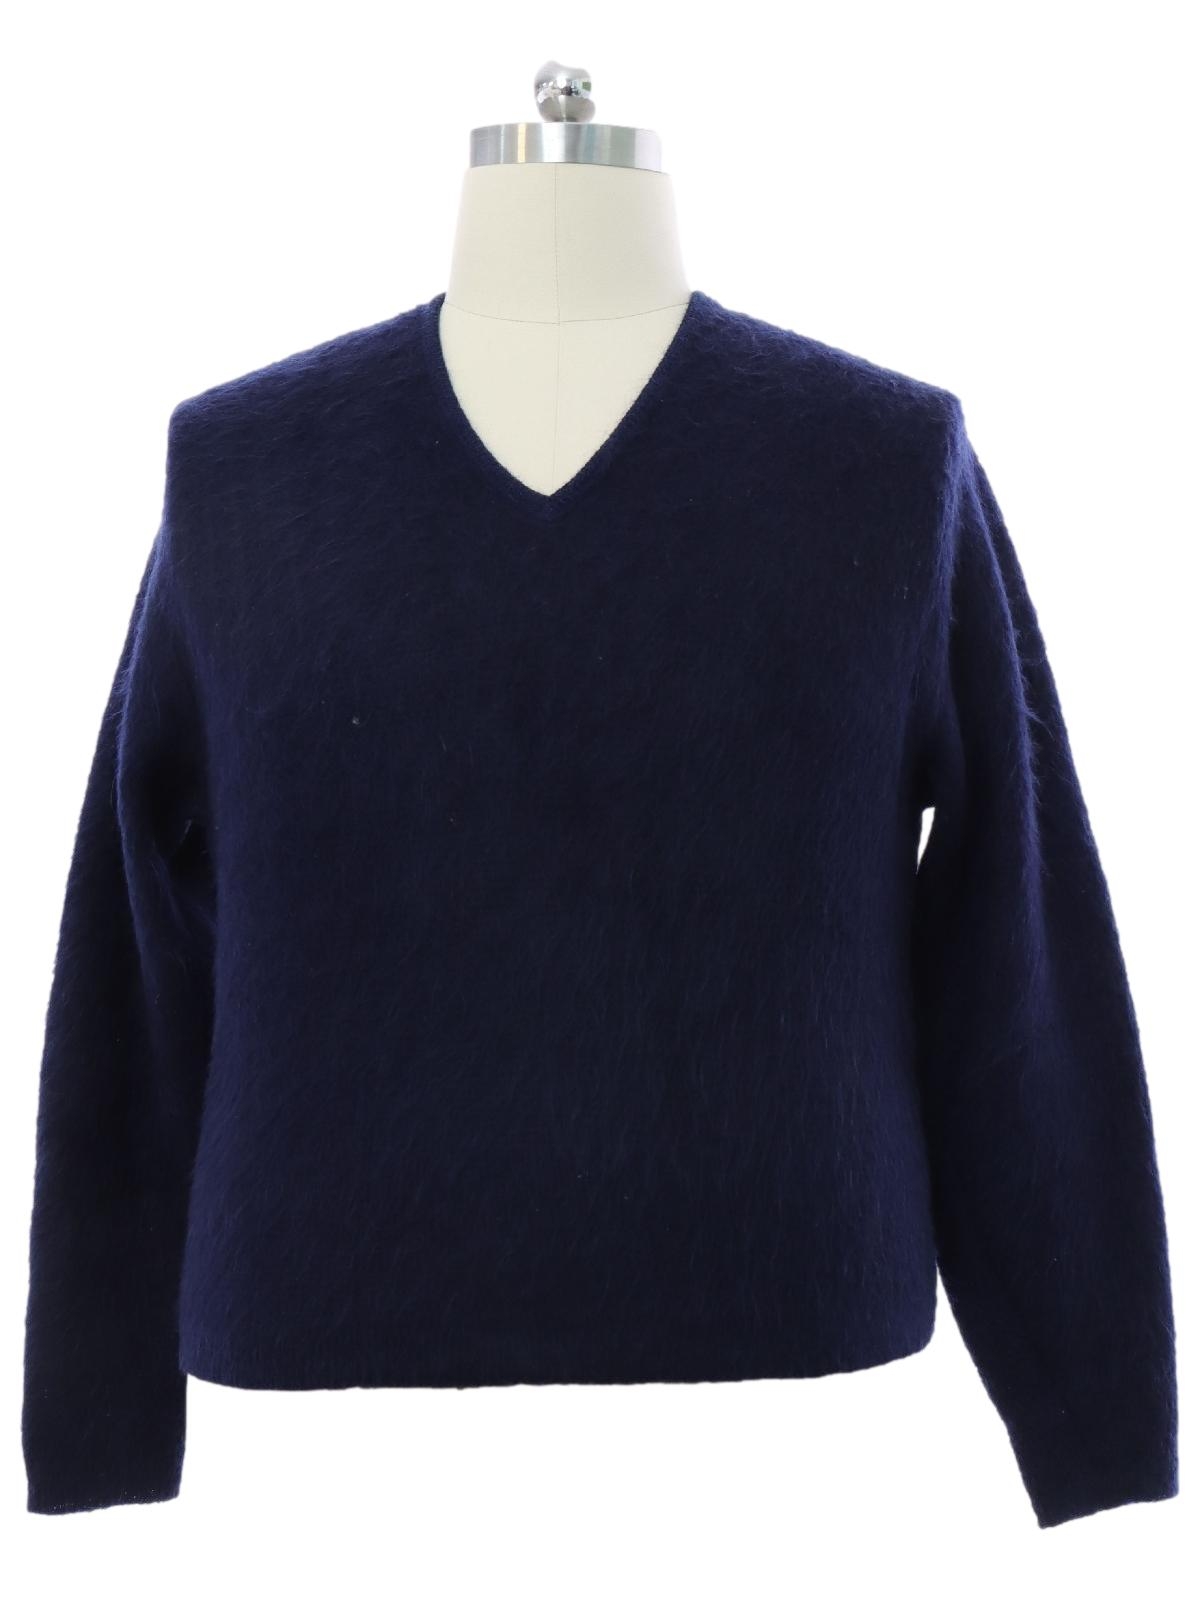 Retro Sixties Sweater: 60s -Sears- Mens navy blue mohair wool blend ...